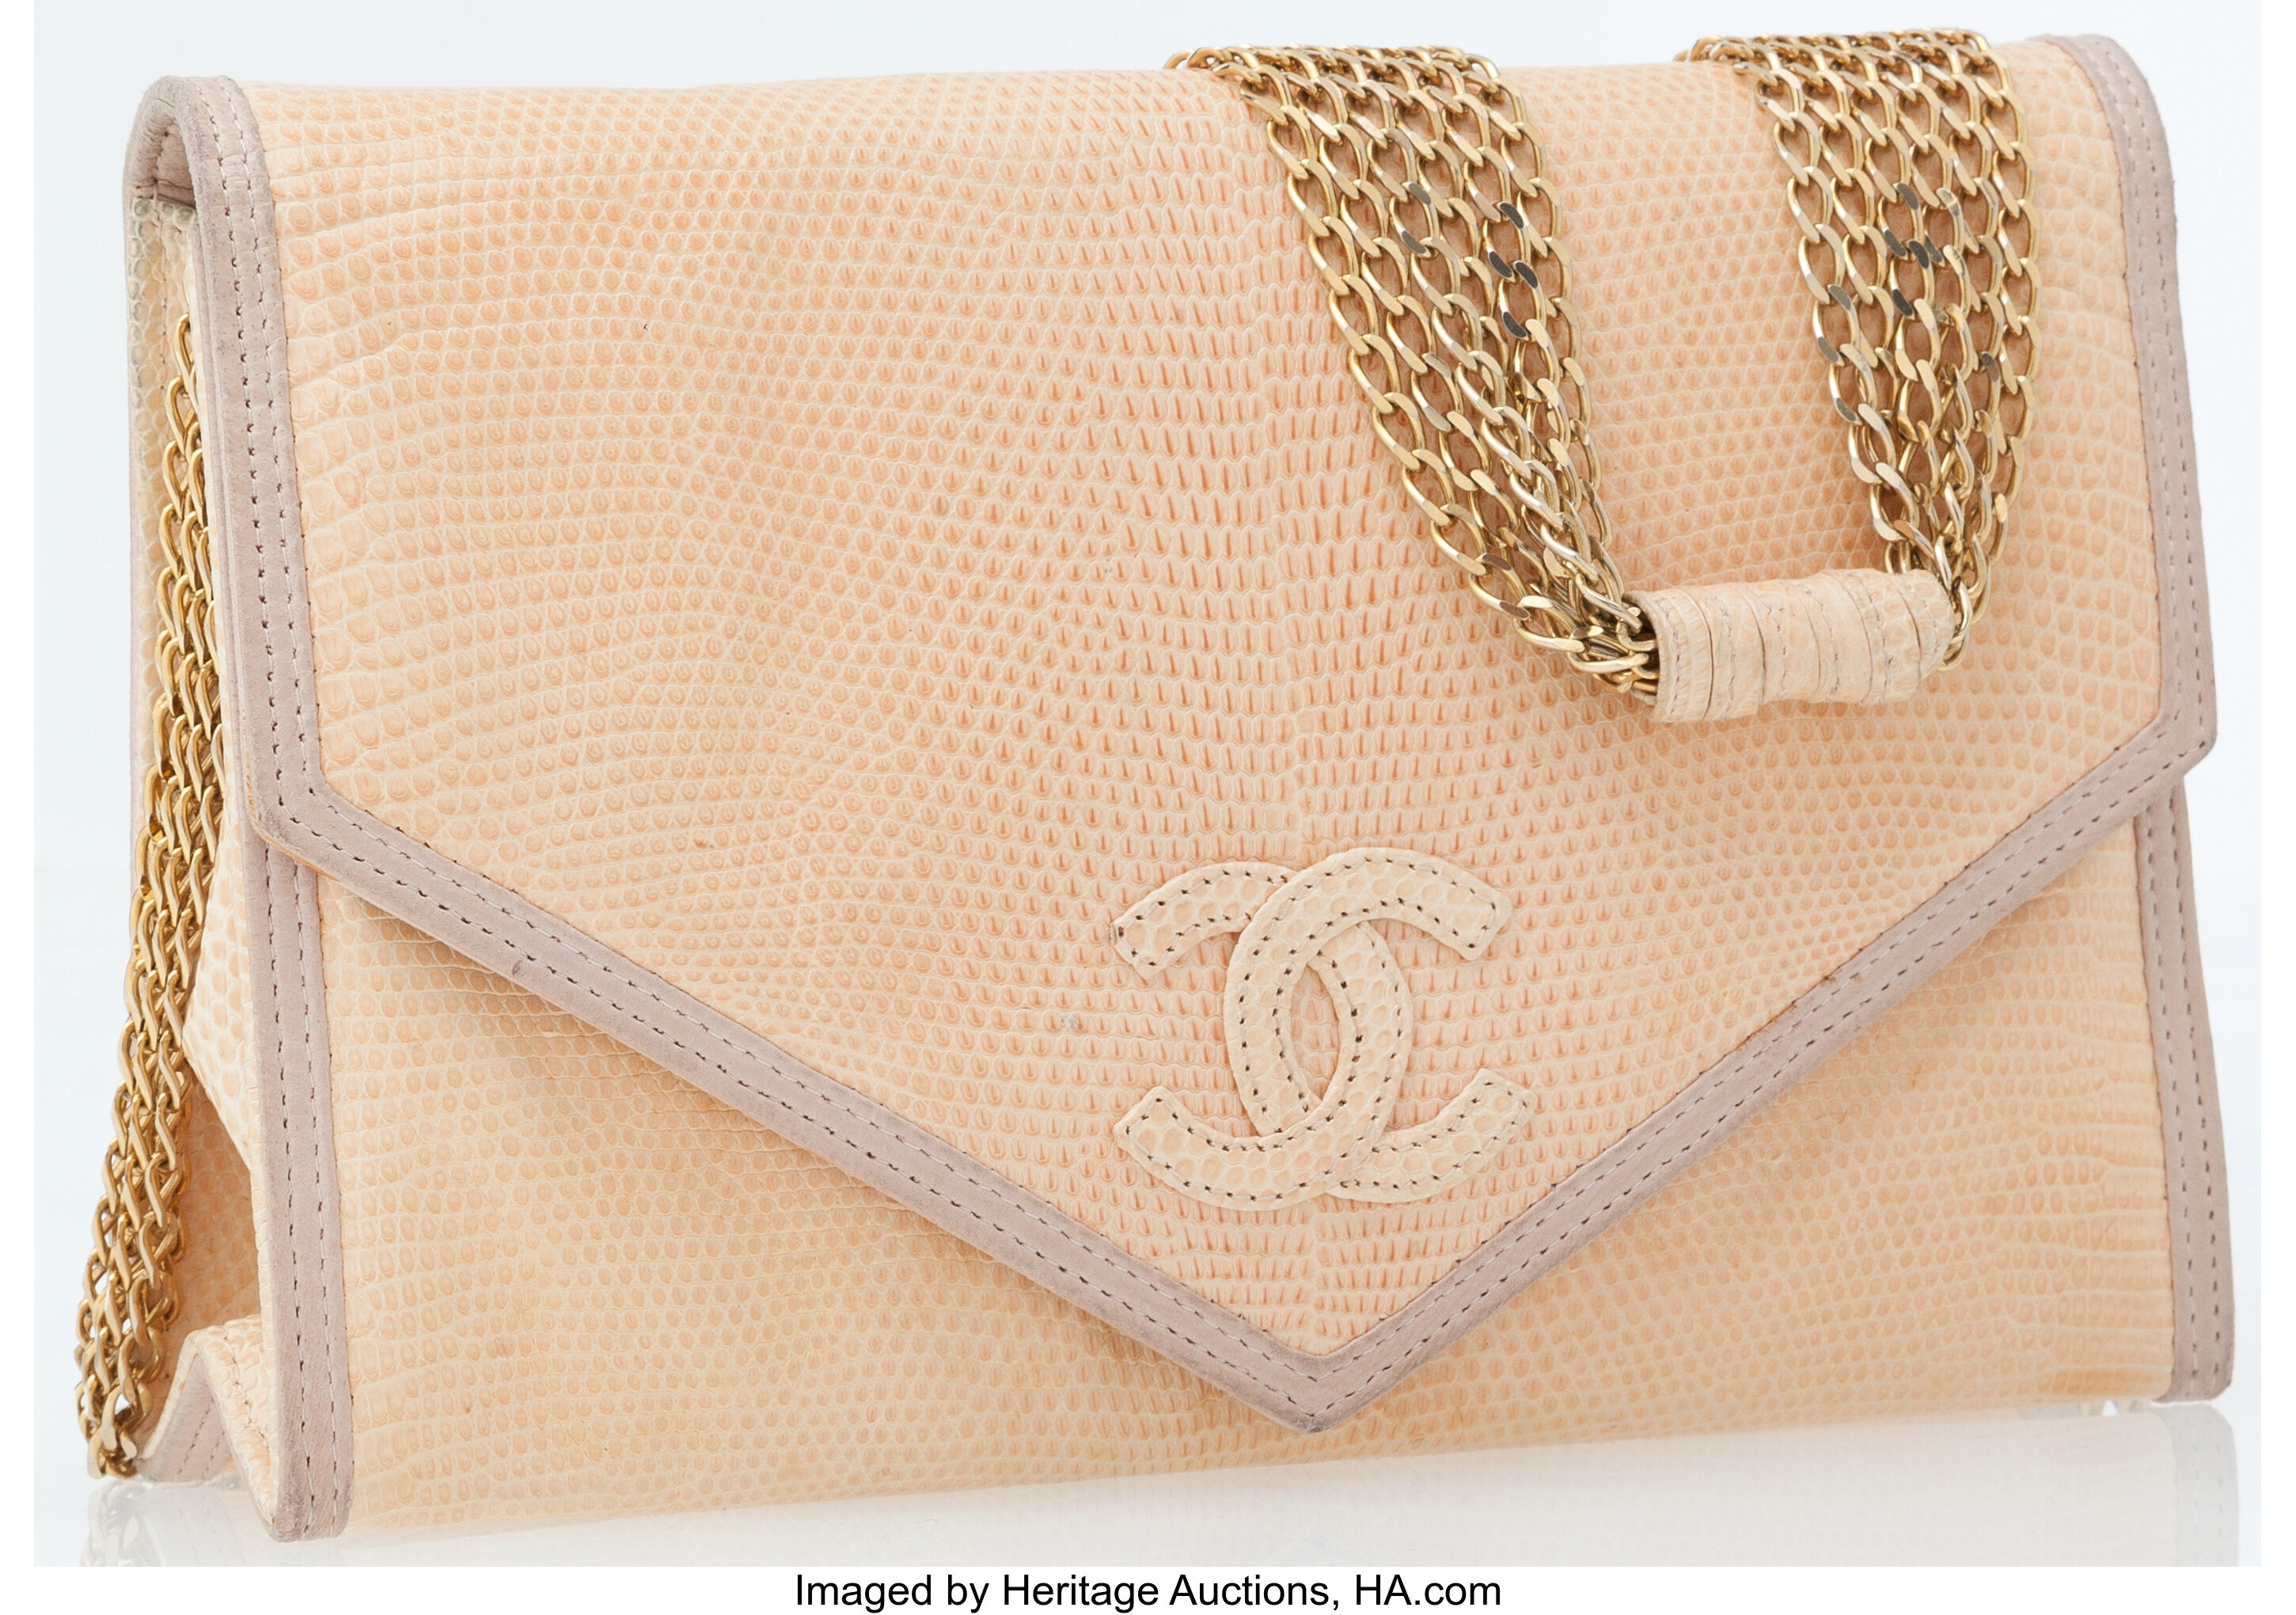 Sold at Auction: AUTHENTIC CHANEL BACKPACK CAVIAR SKIN LEATHER